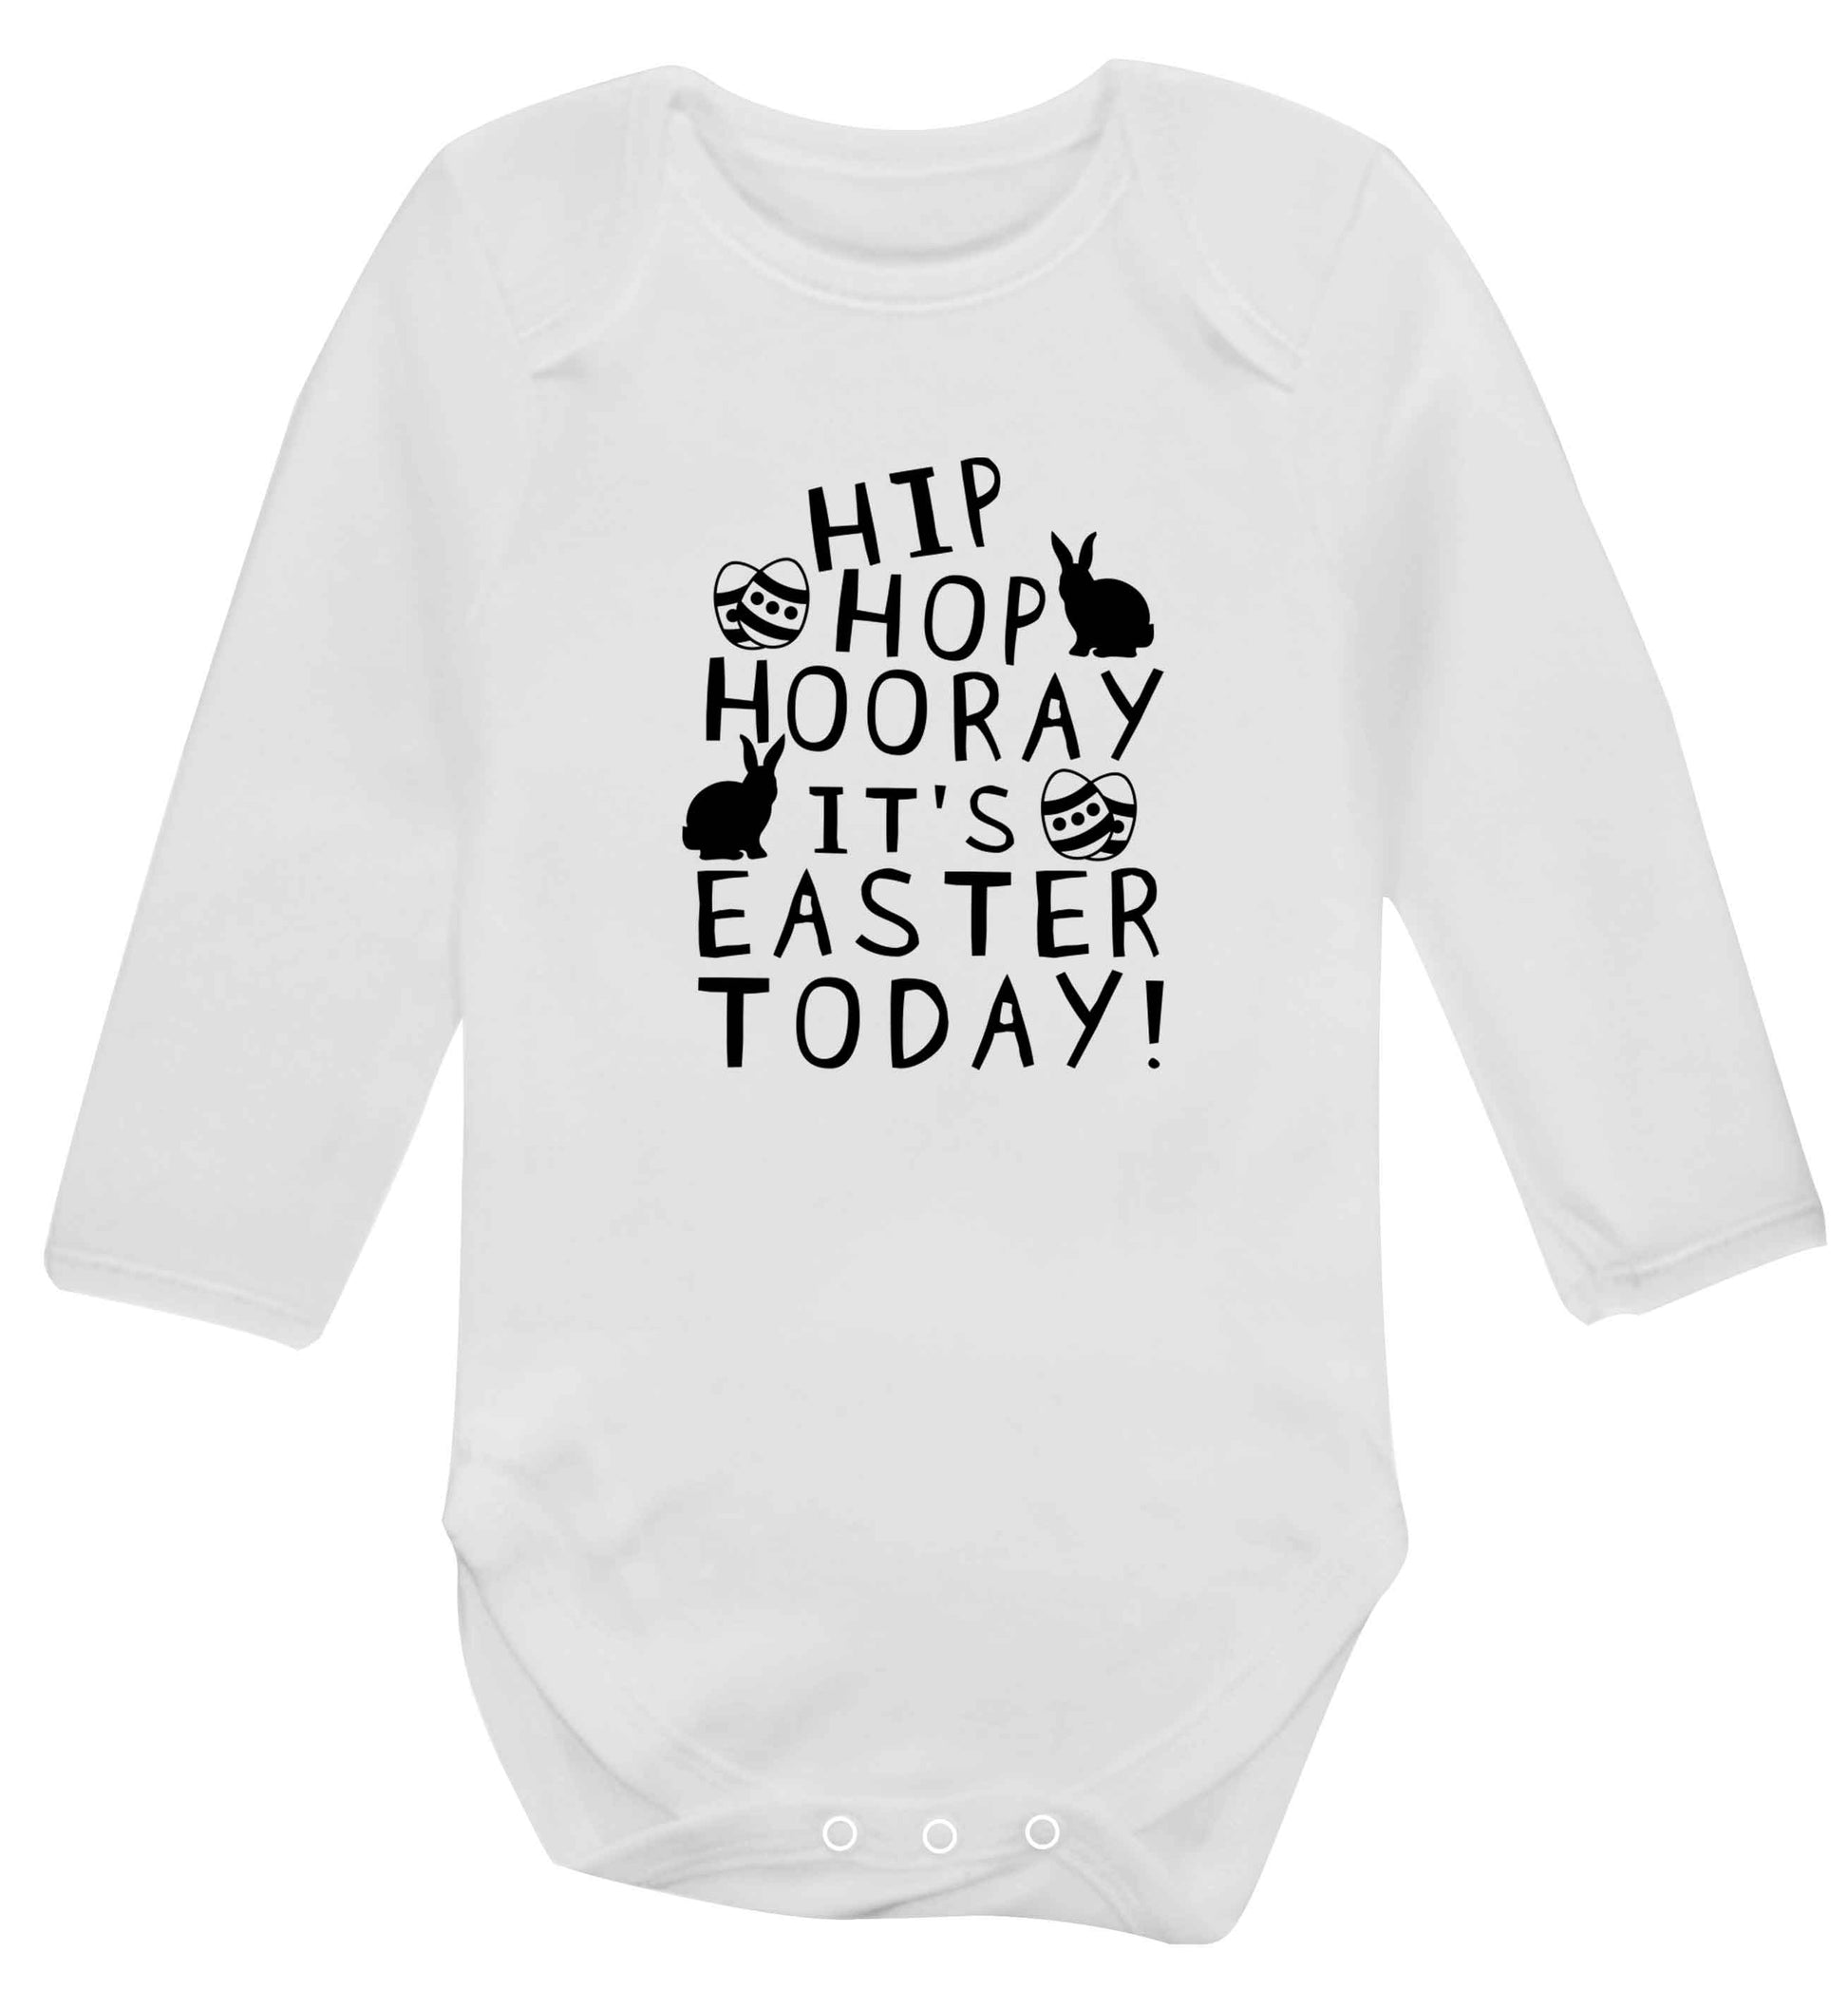 Hip hip hooray it's Easter today! baby vest long sleeved white 6-12 months